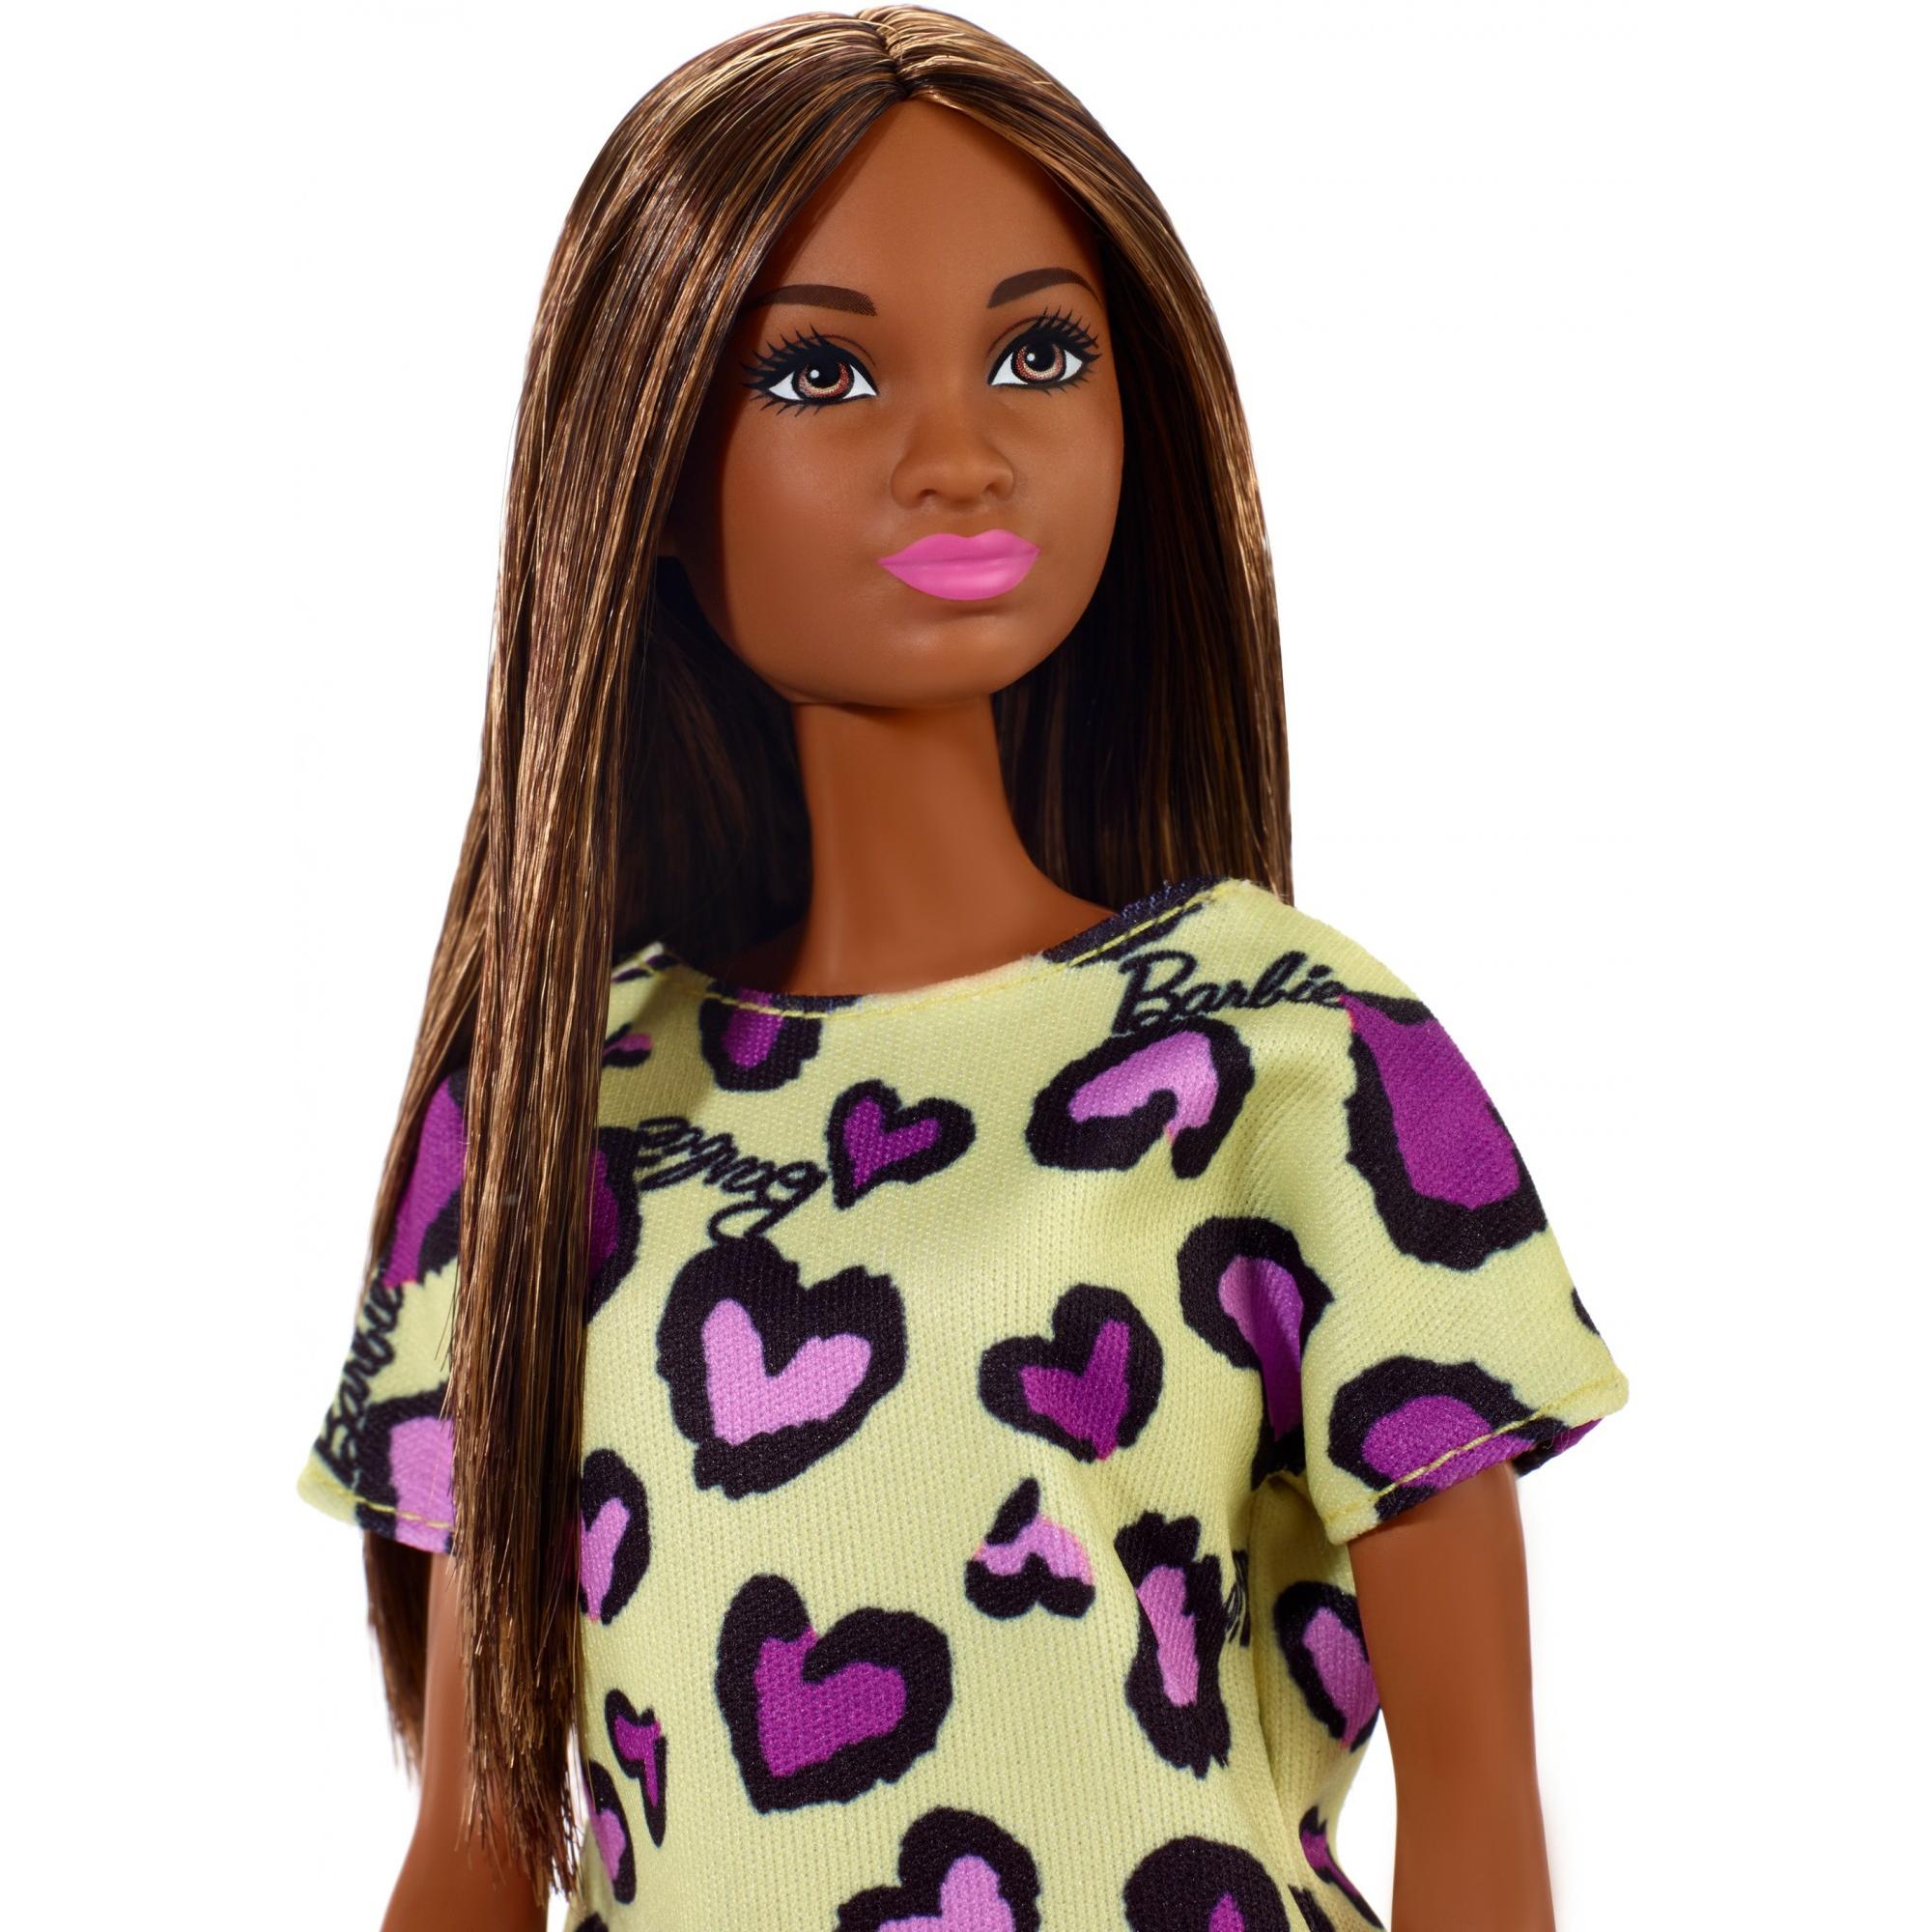 Barbie Doll, Brunette, Wearing Yellow And Purple Heart-Print Dress - image 3 of 6